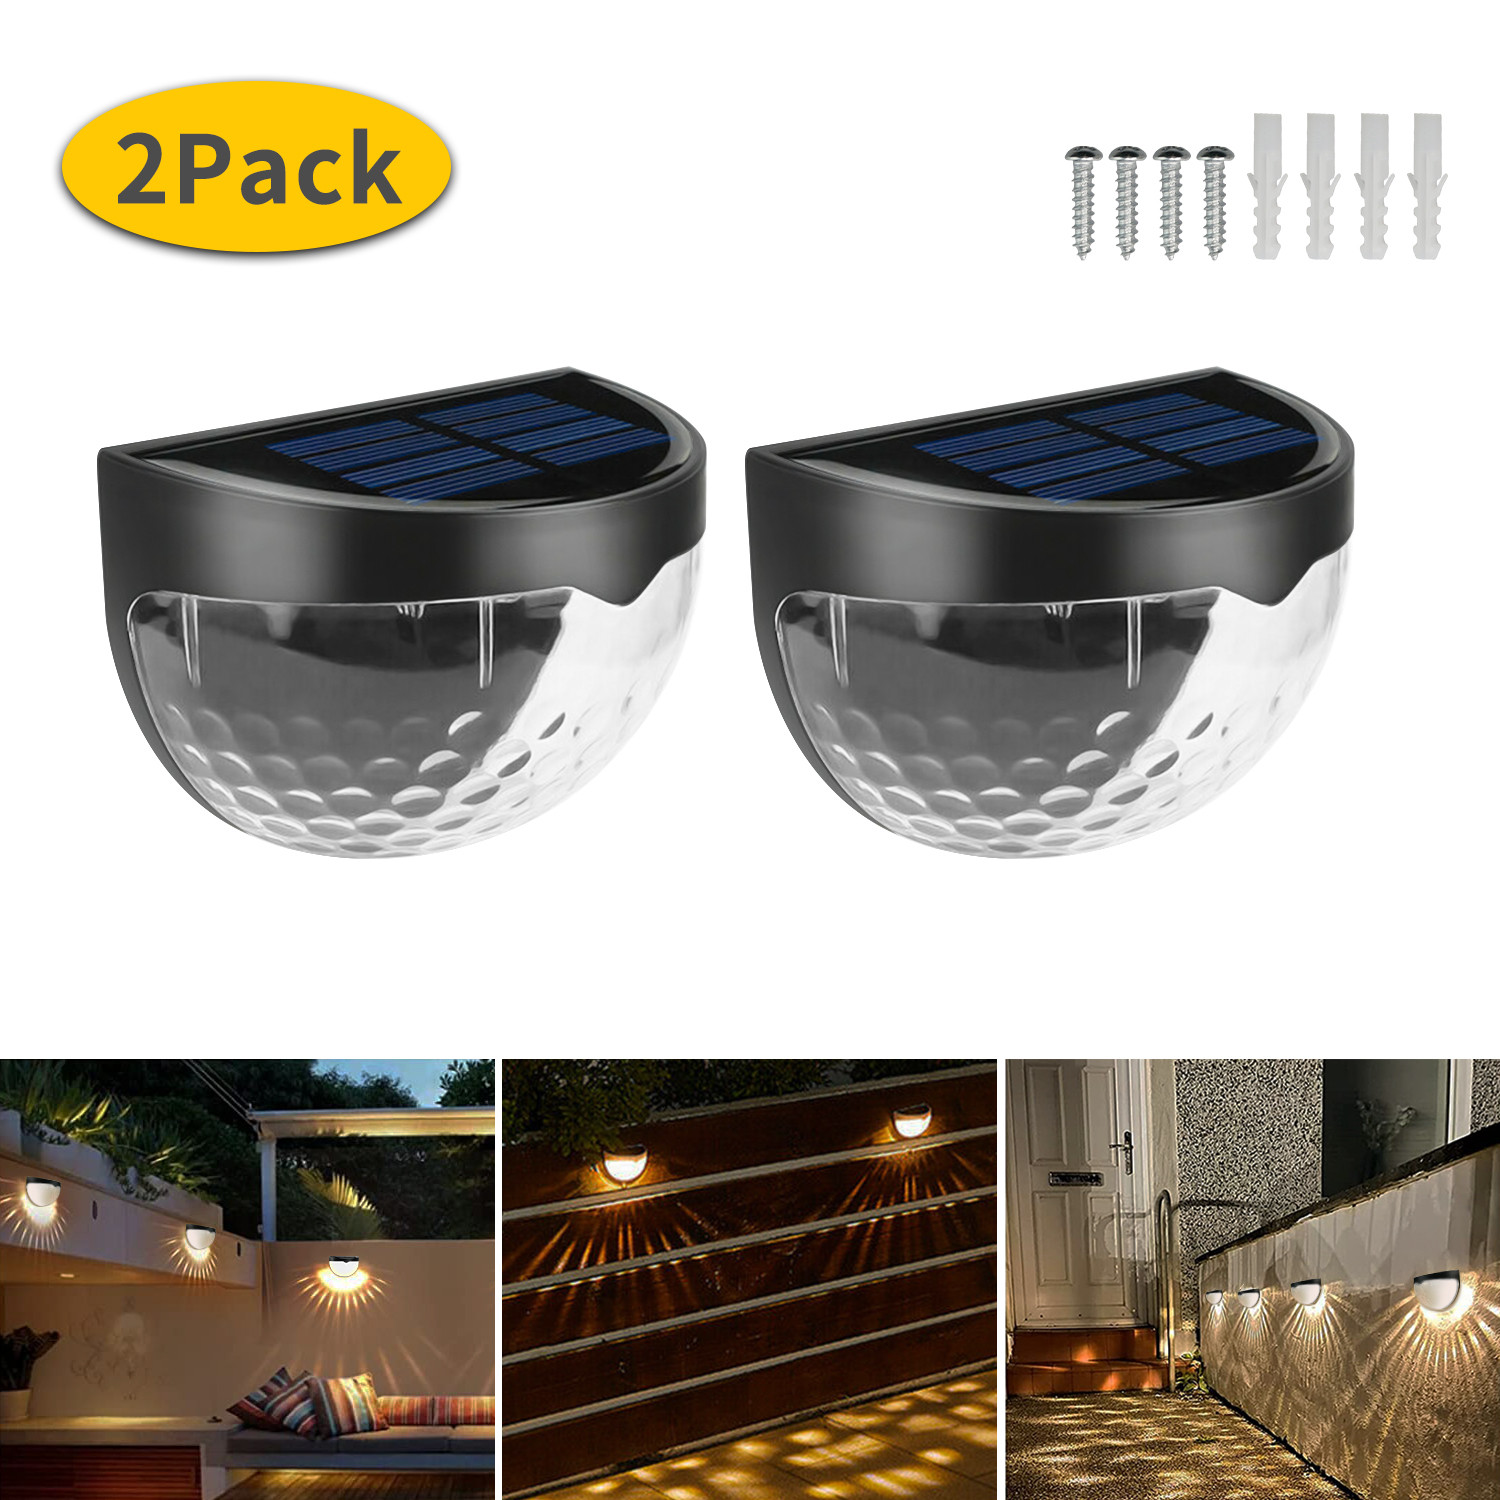 Elegant Choise Solar Wall Lights 6LED IP65 Waterproof Deck Lamps for Garden Fence Yard, 2 Pack - image 1 of 12